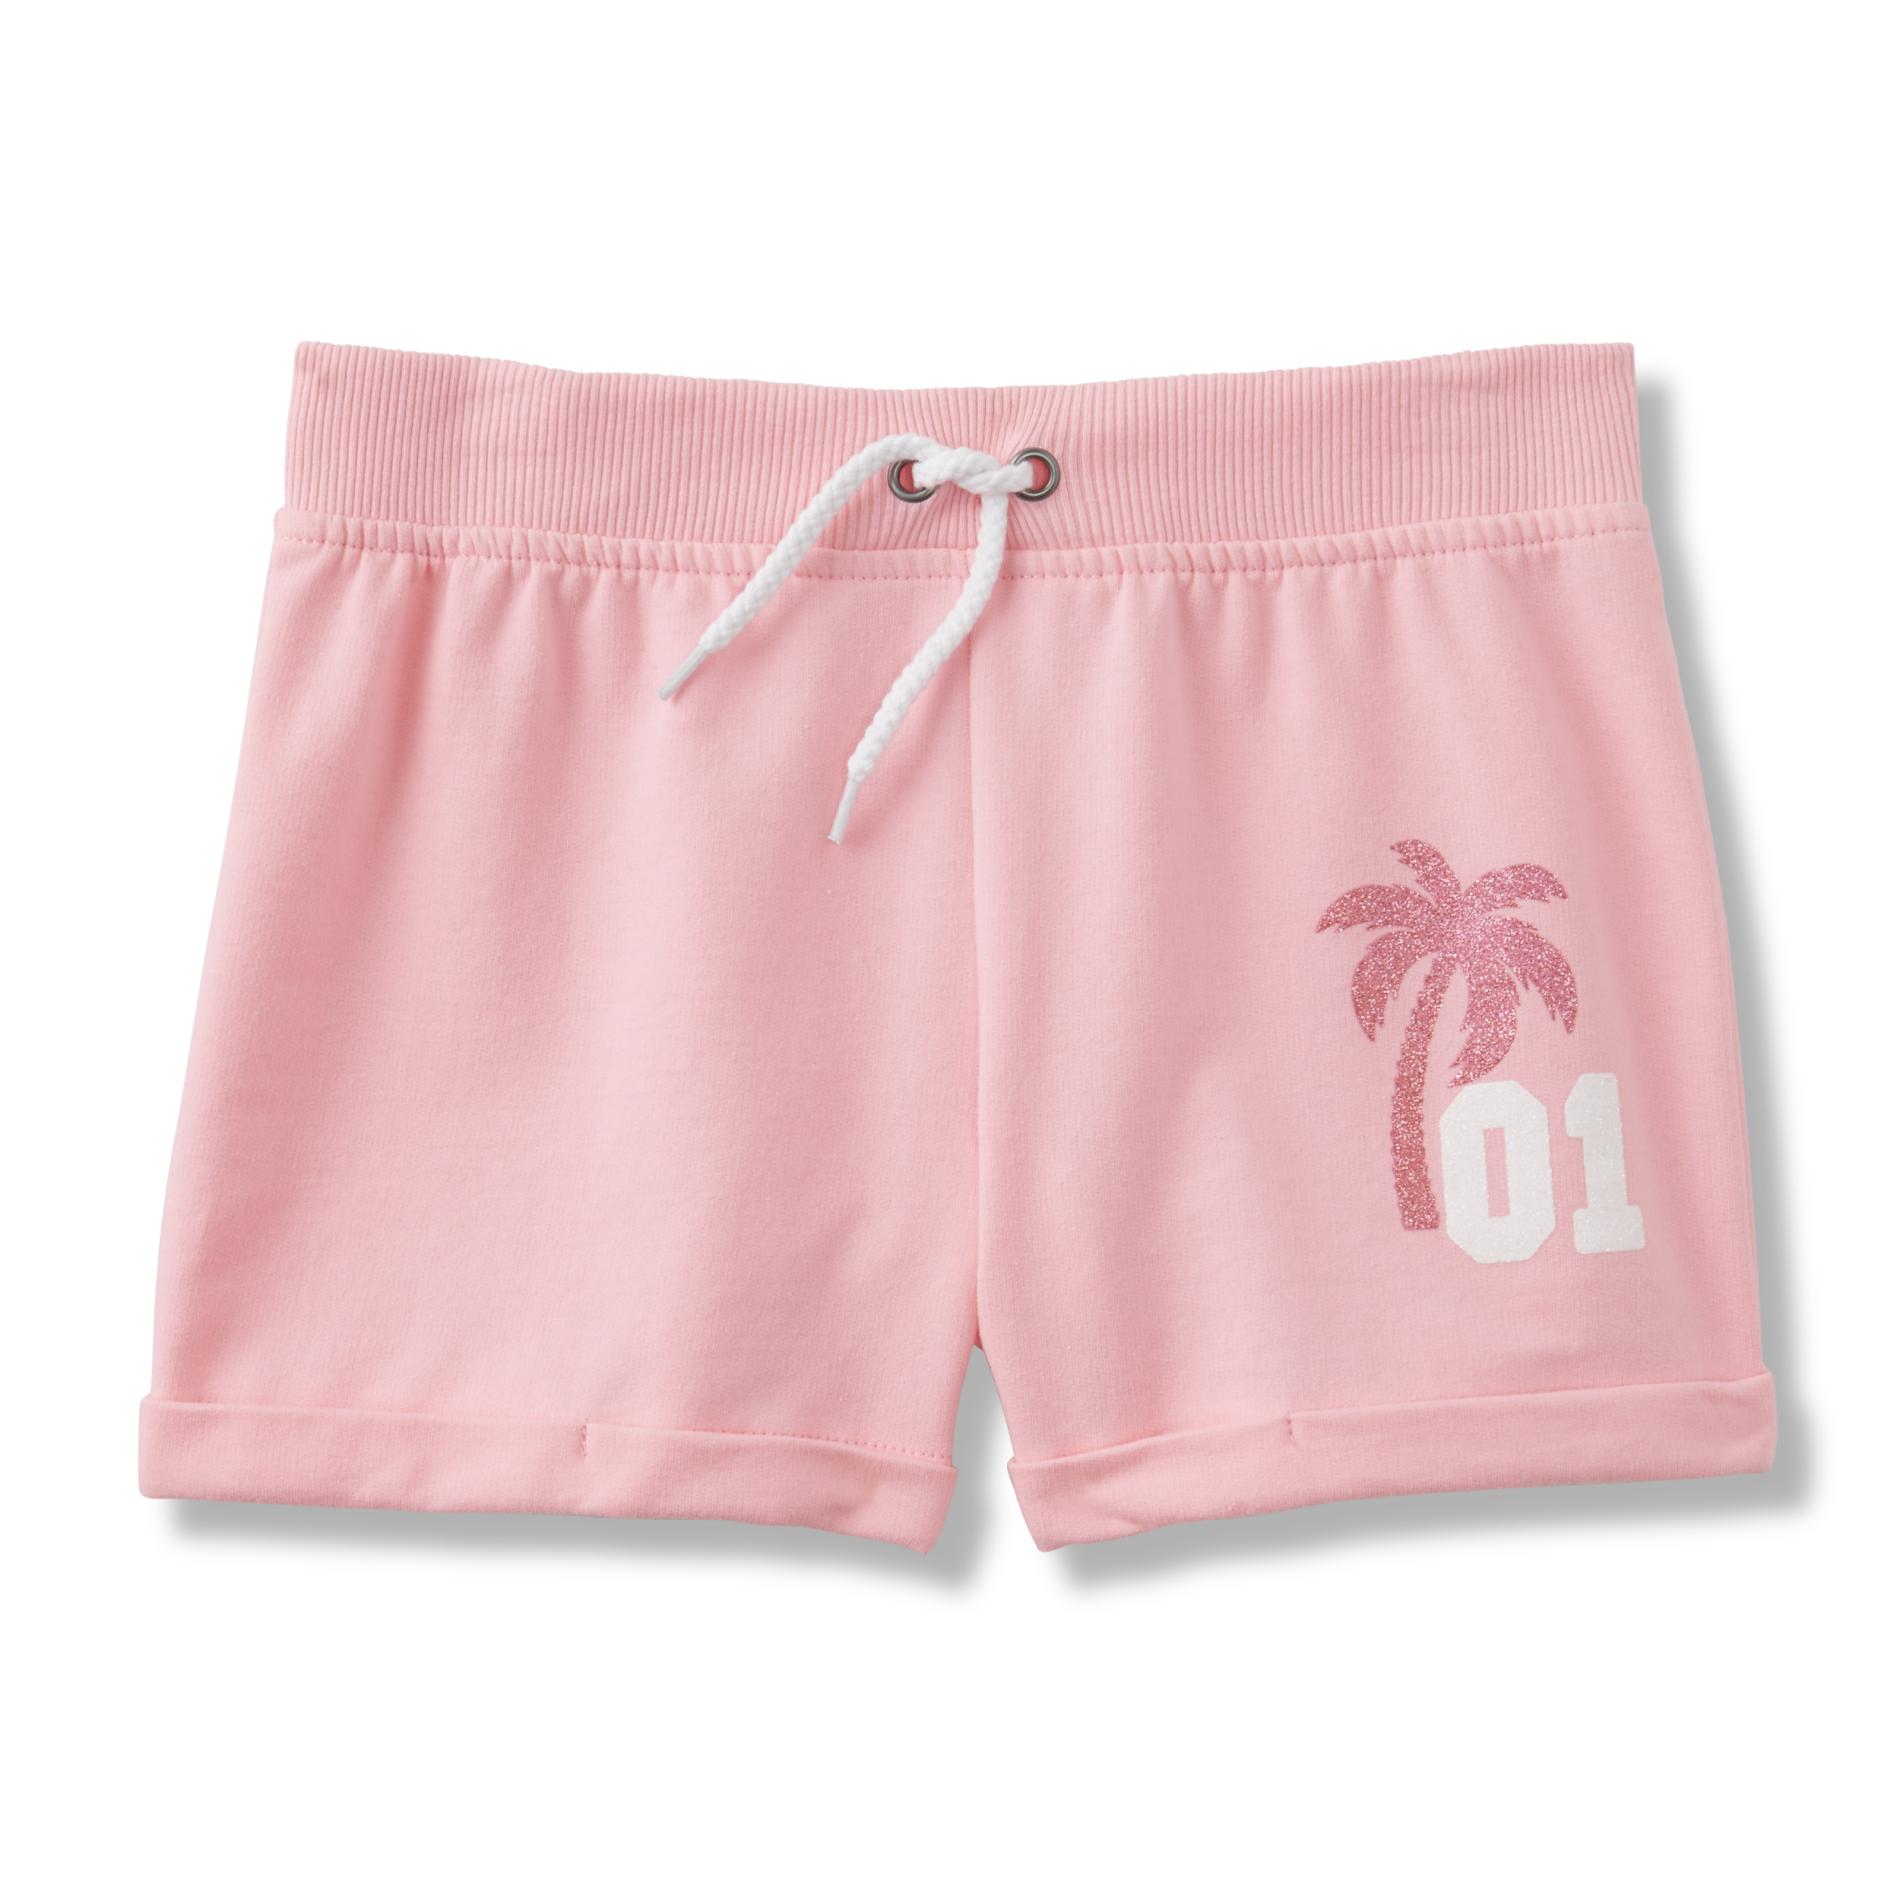 Canyon River Blues Girls' Cuffed French Terry Shorts - Palm Tree